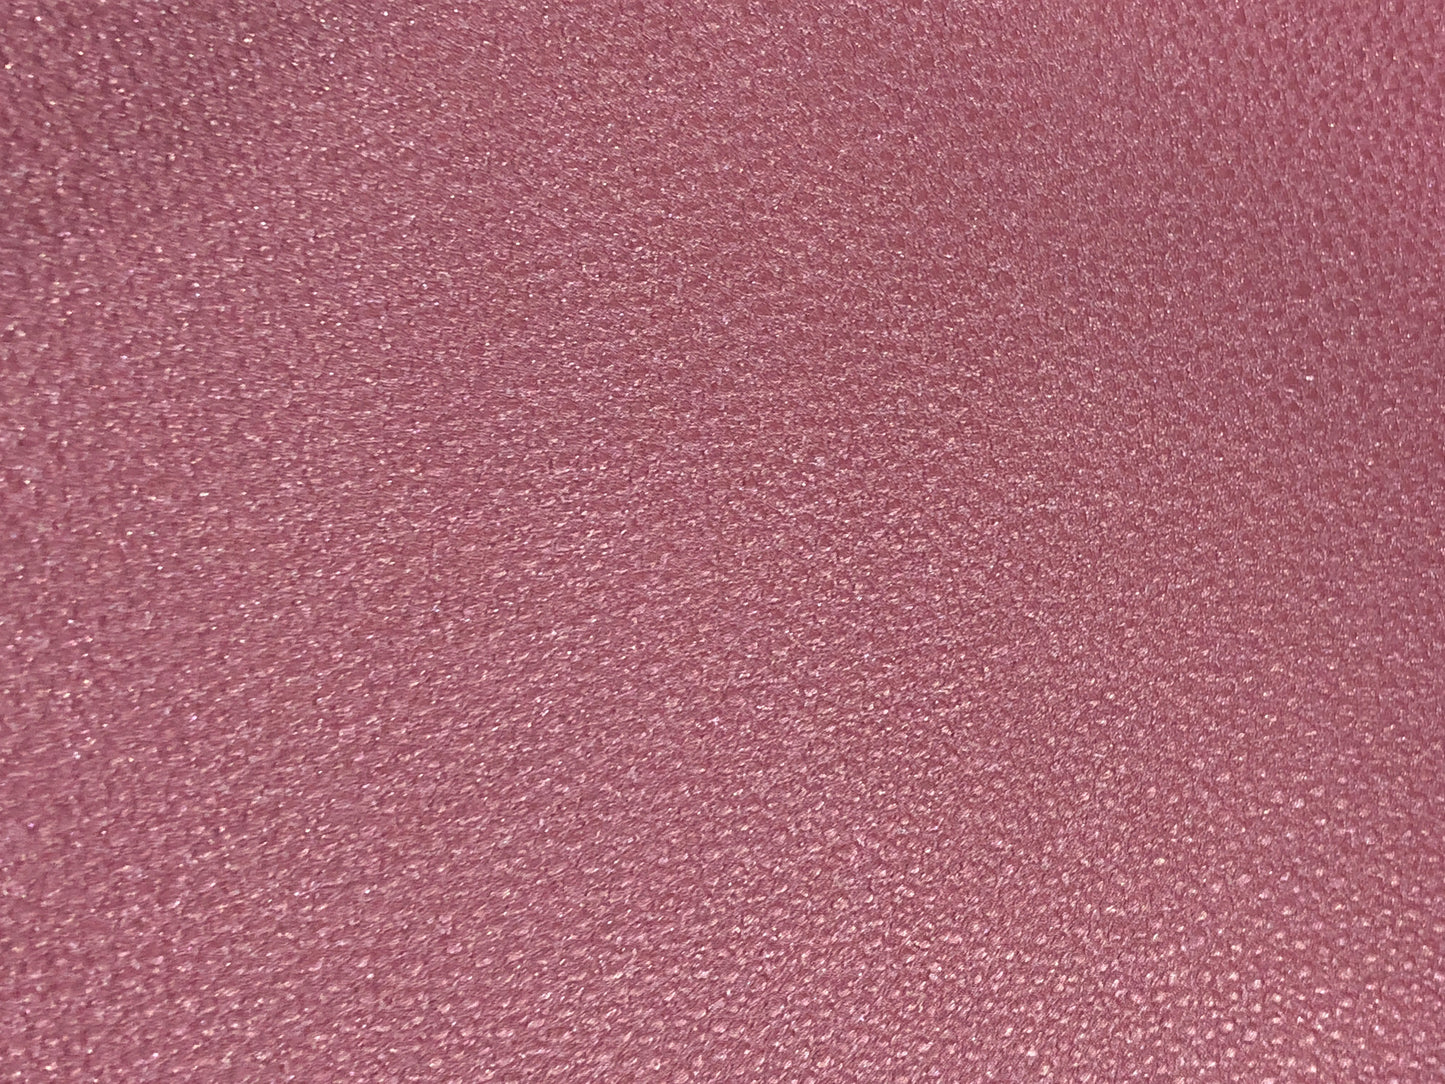 Pearlescent Look Litchi Faux Leather